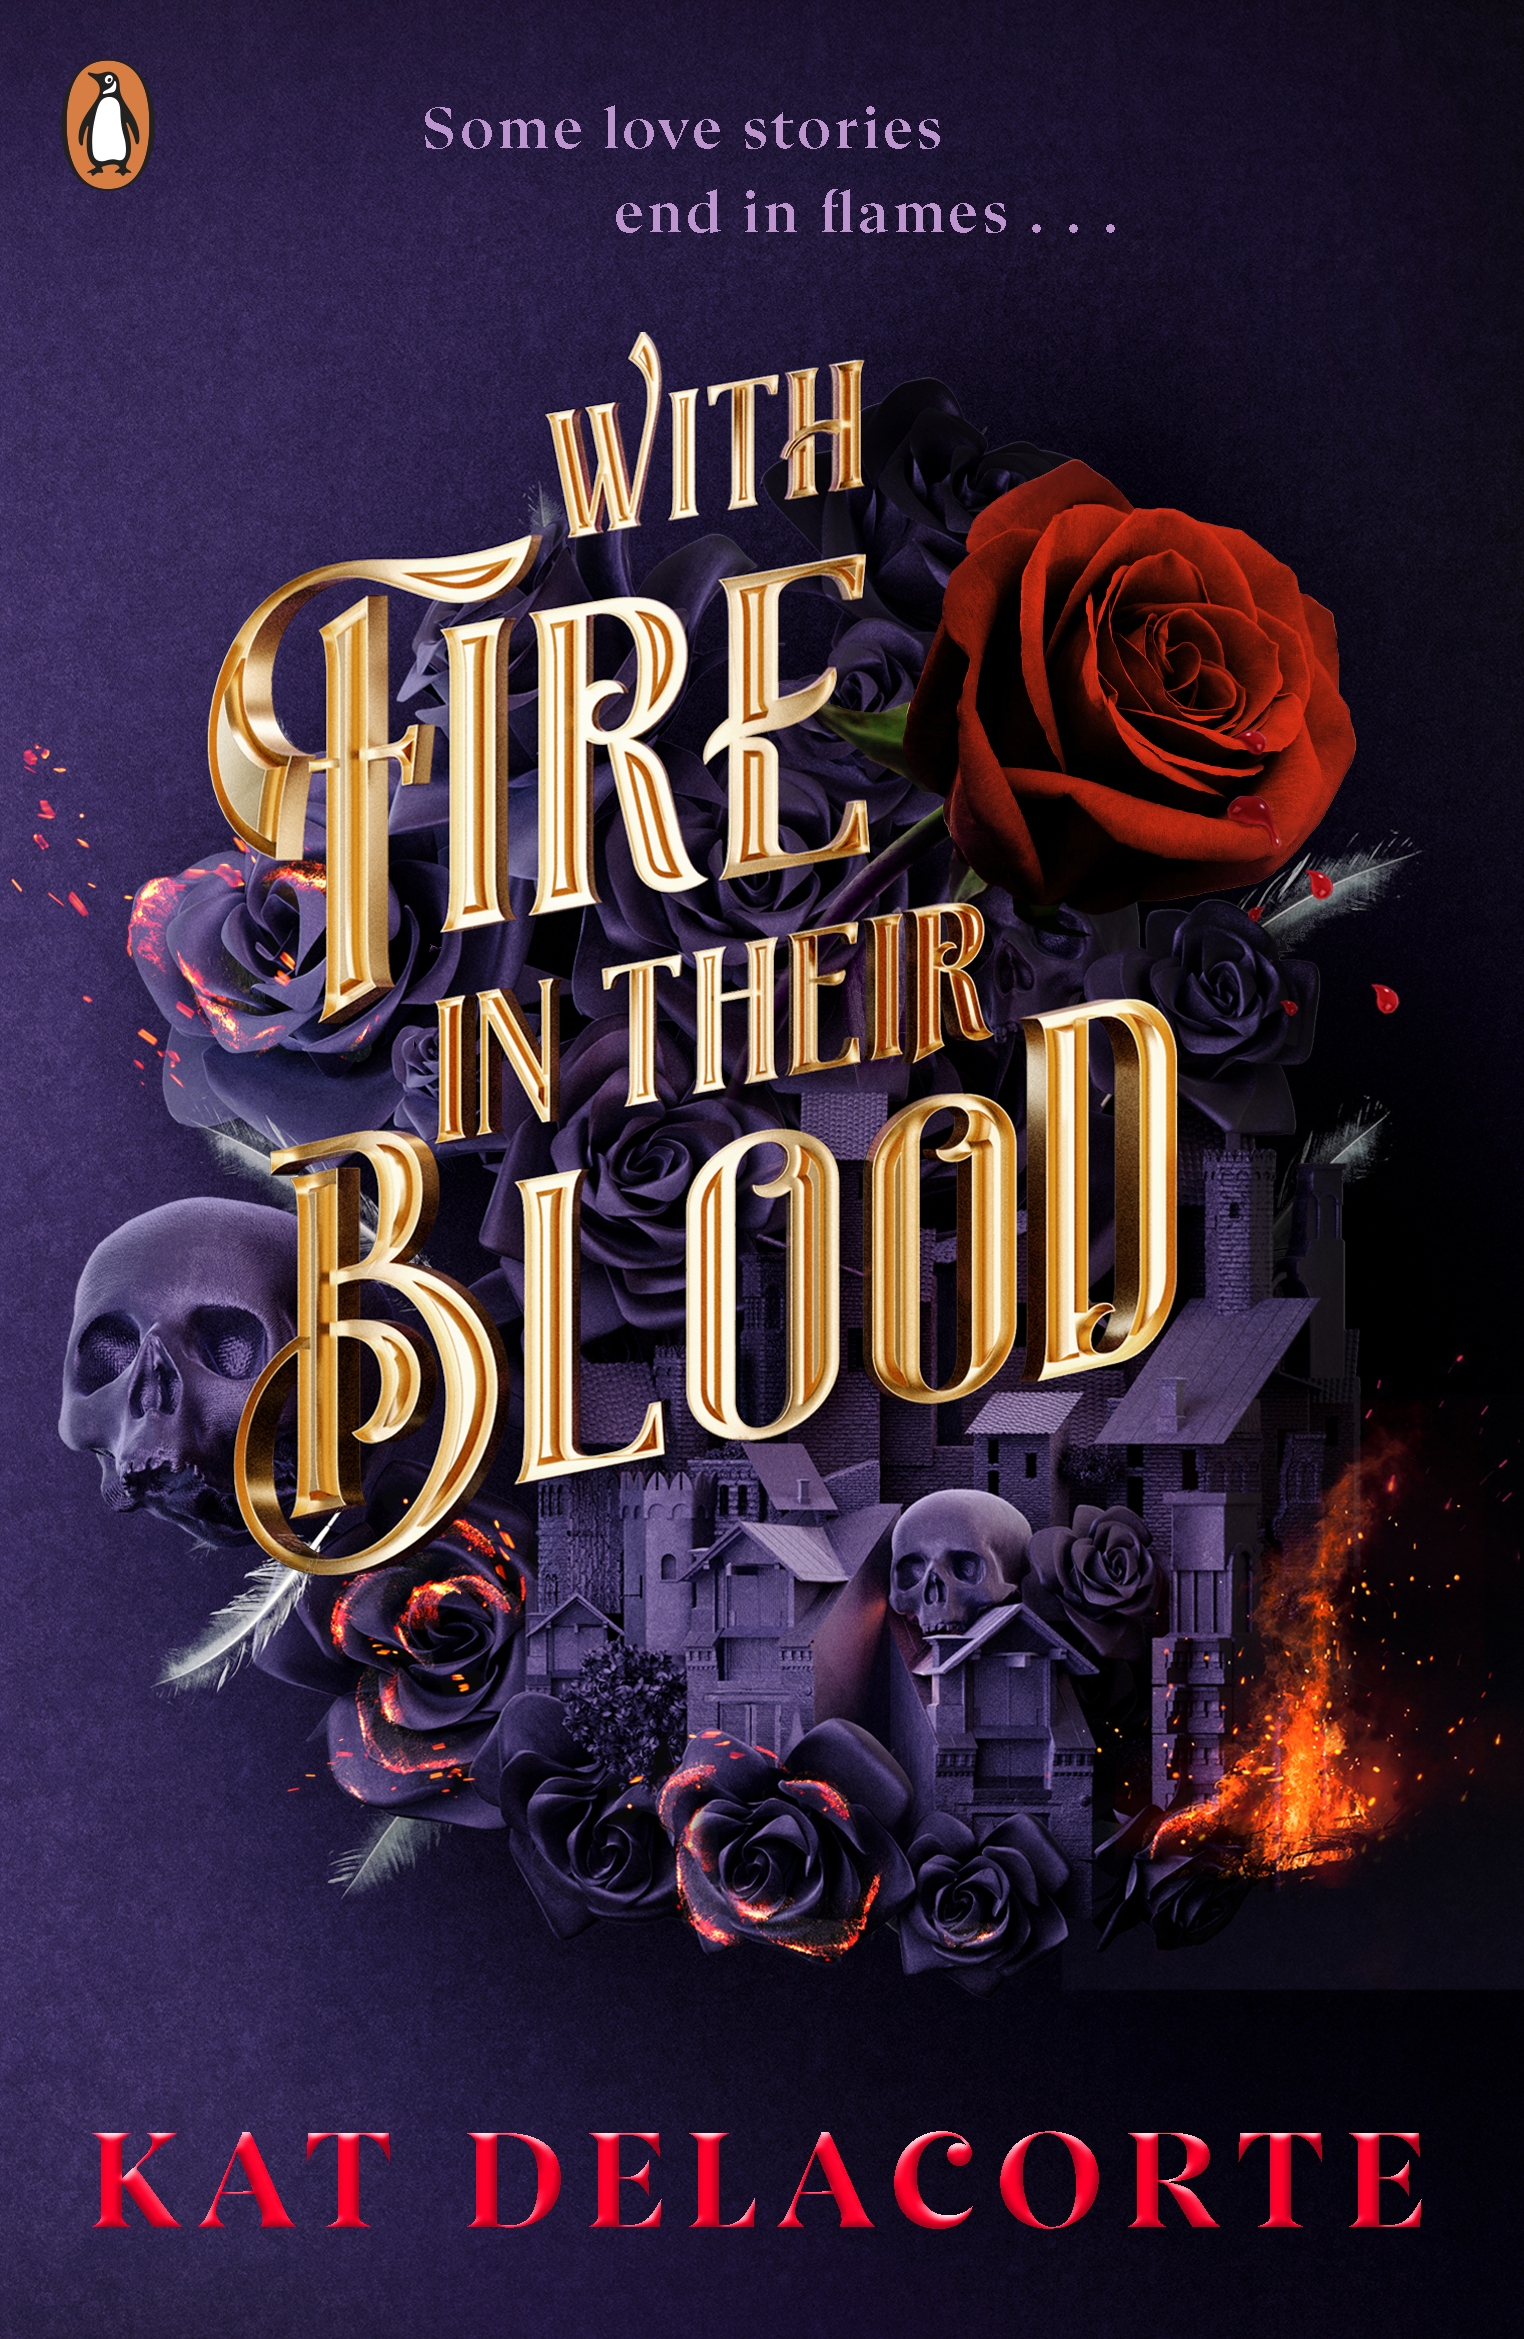 With Fire In Their Blood (Skeleton Keepers, #1) by Kat Delacorte